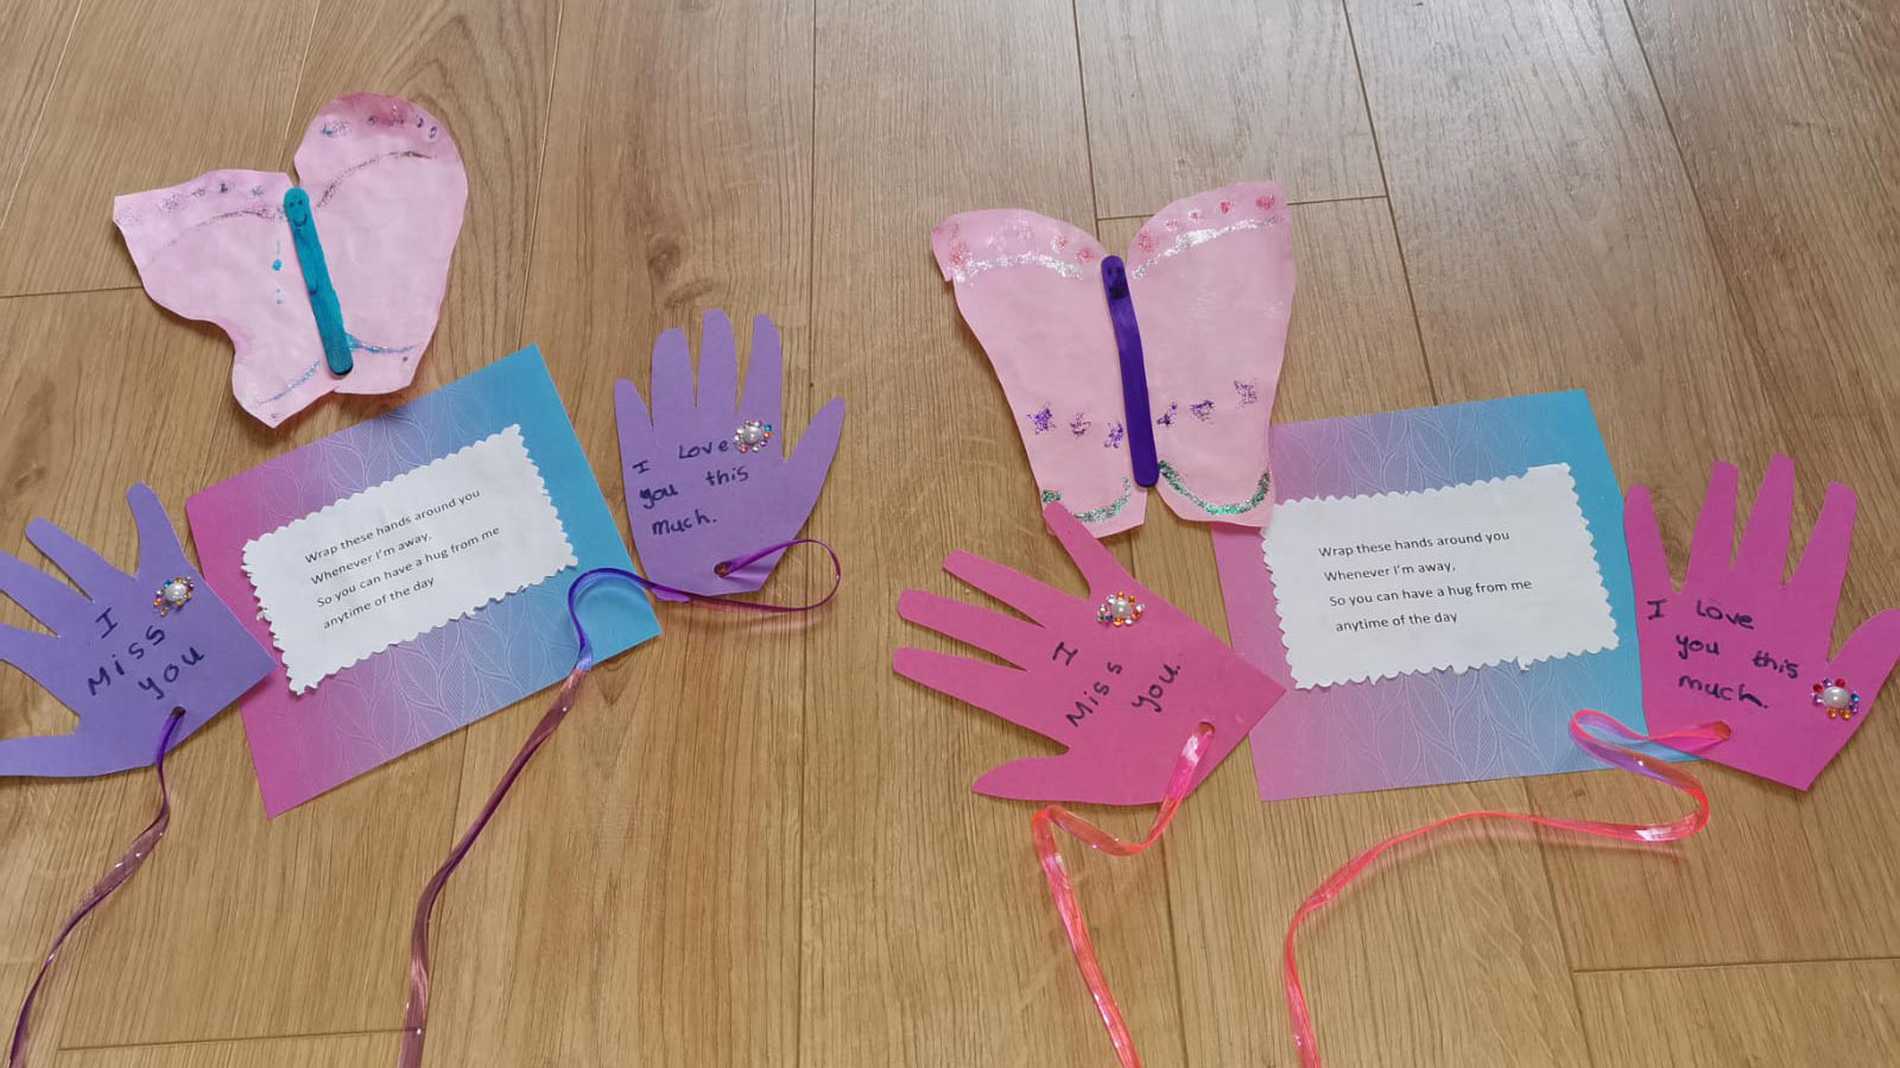 Butterflies and cut out hand prints with motivational messages, created by wish child Bethany.